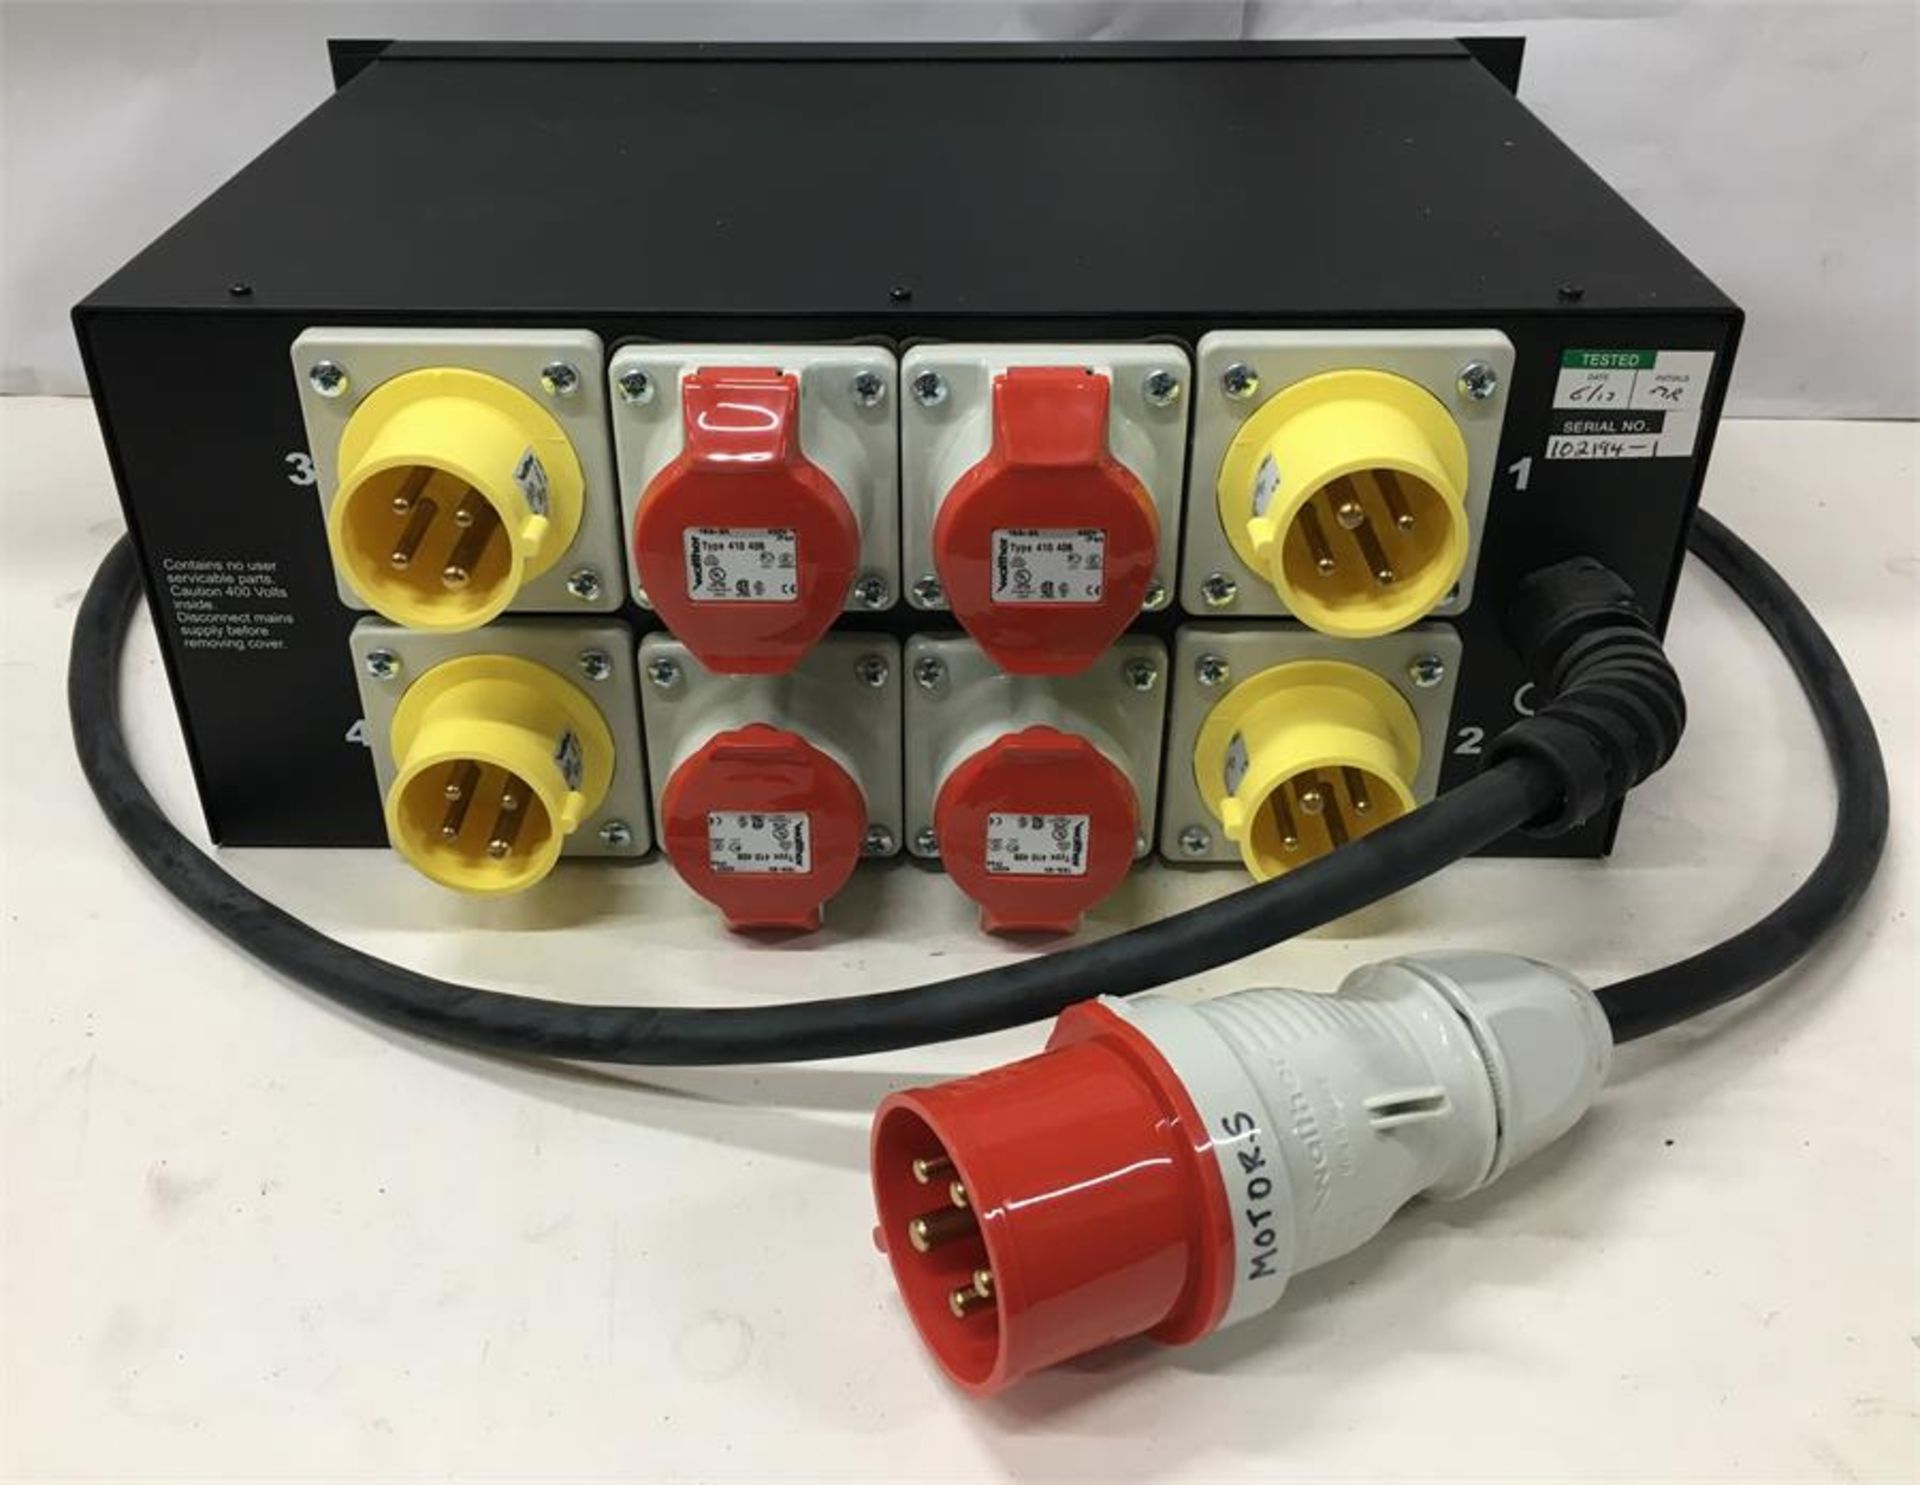 Outboard LV4 Low Voltage Chain Hoist Controller with 4 x 3 phase adapter leads for hoists - 16amp 11 - Image 3 of 3